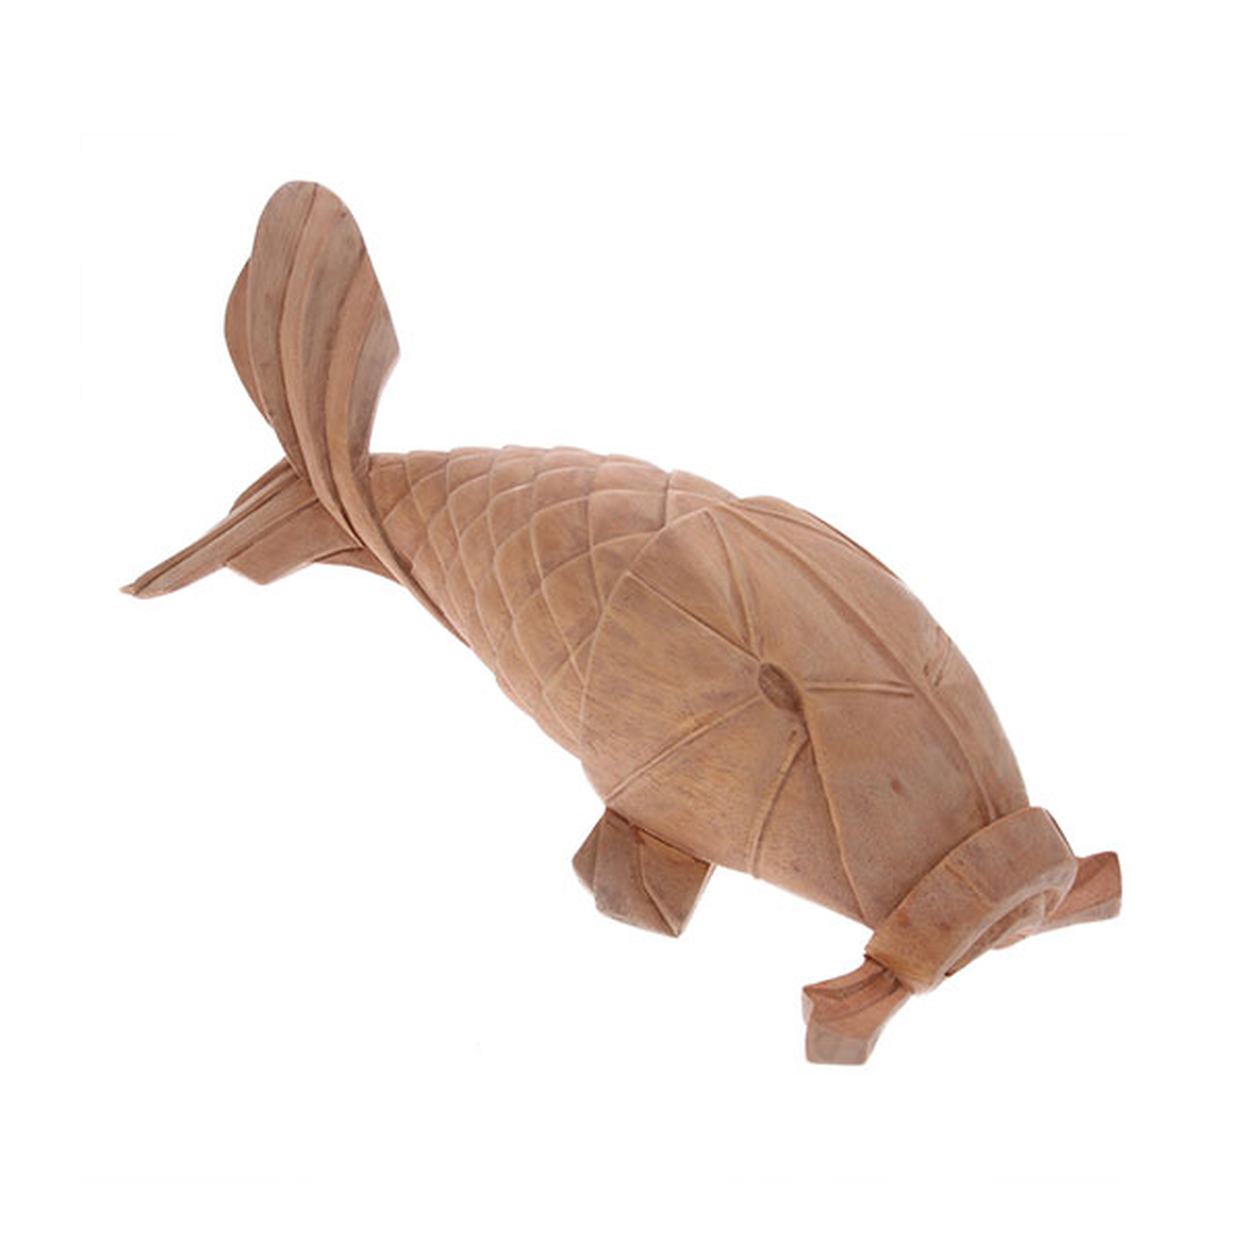 Hand carved wooden carp fish